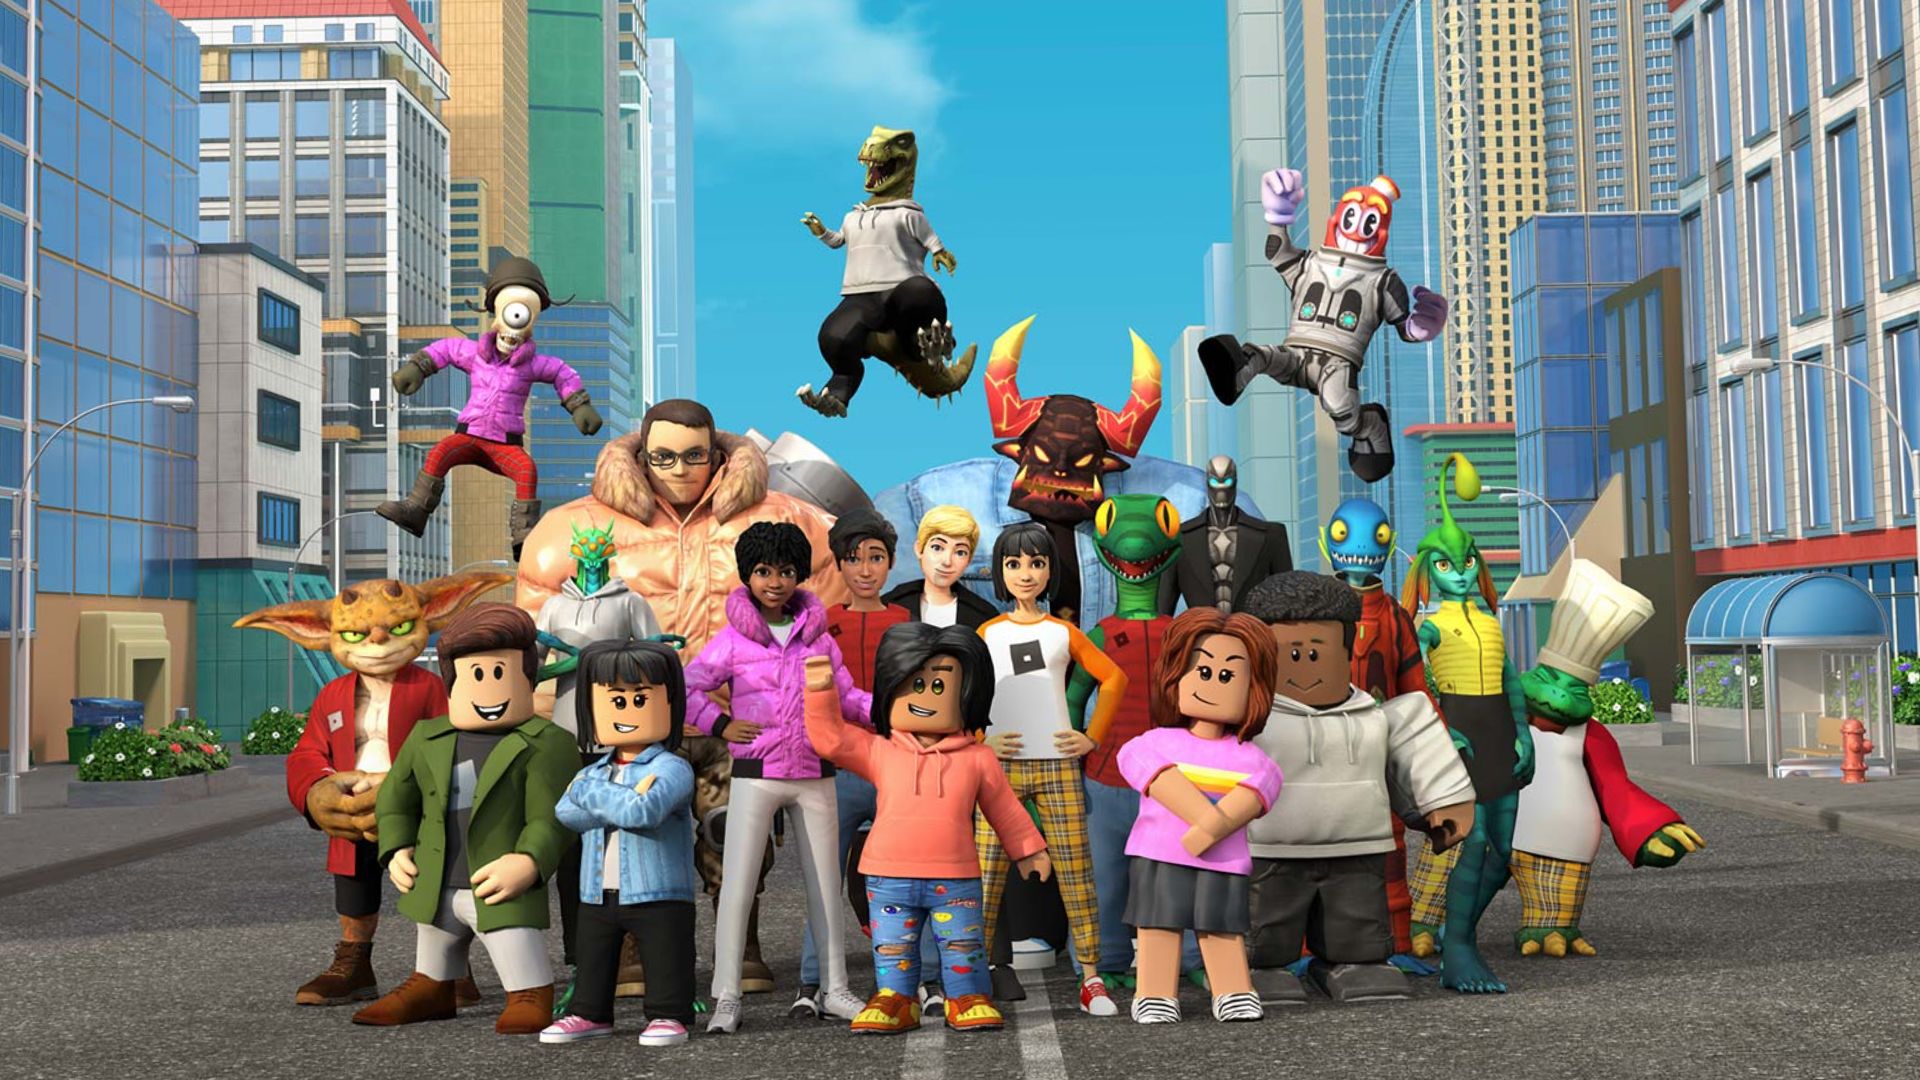 Financial results prove Roblox games are big business